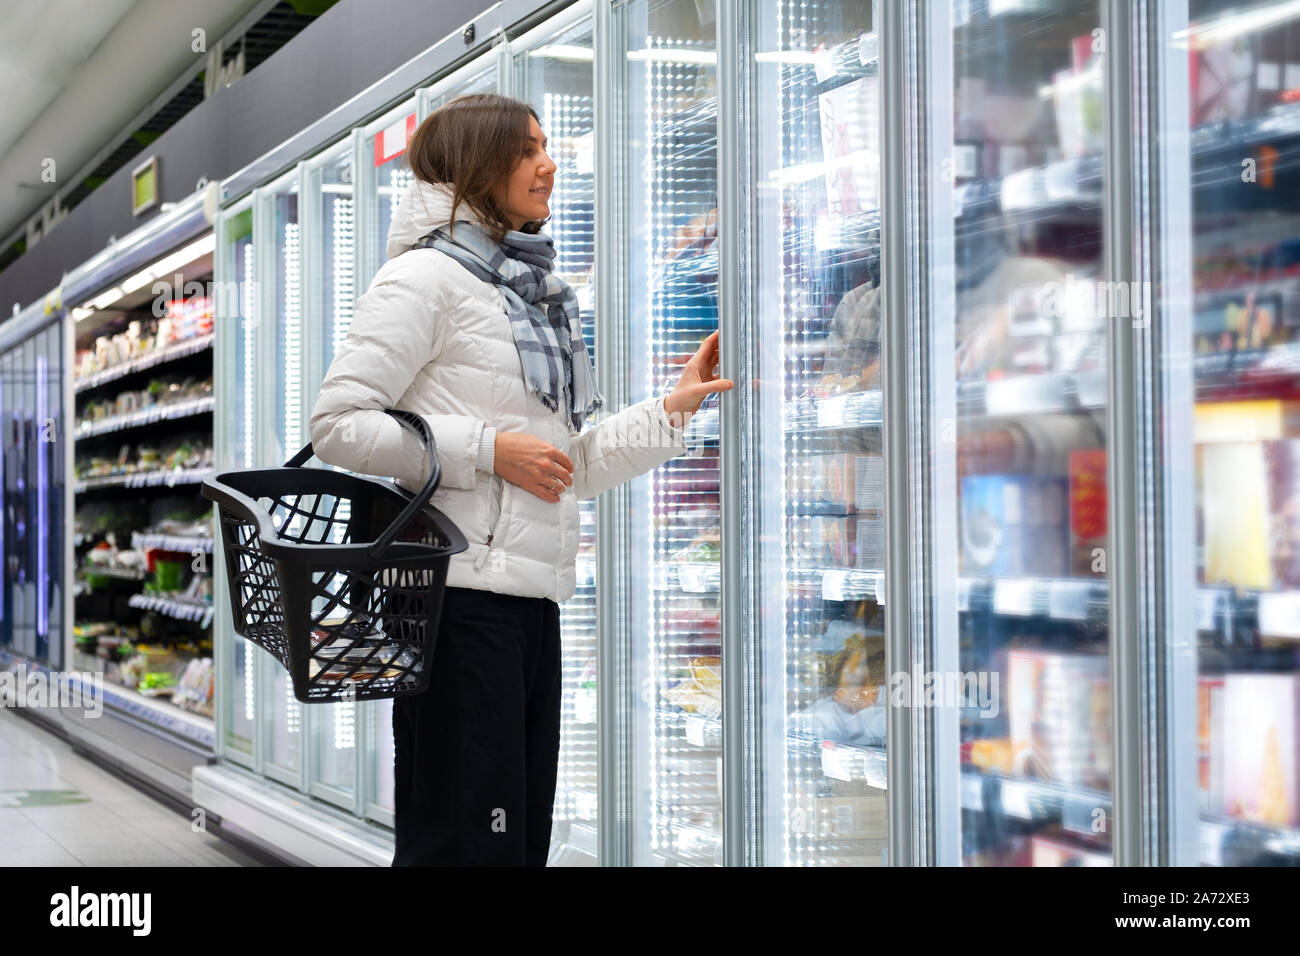 woman in grocery store Stock Photo